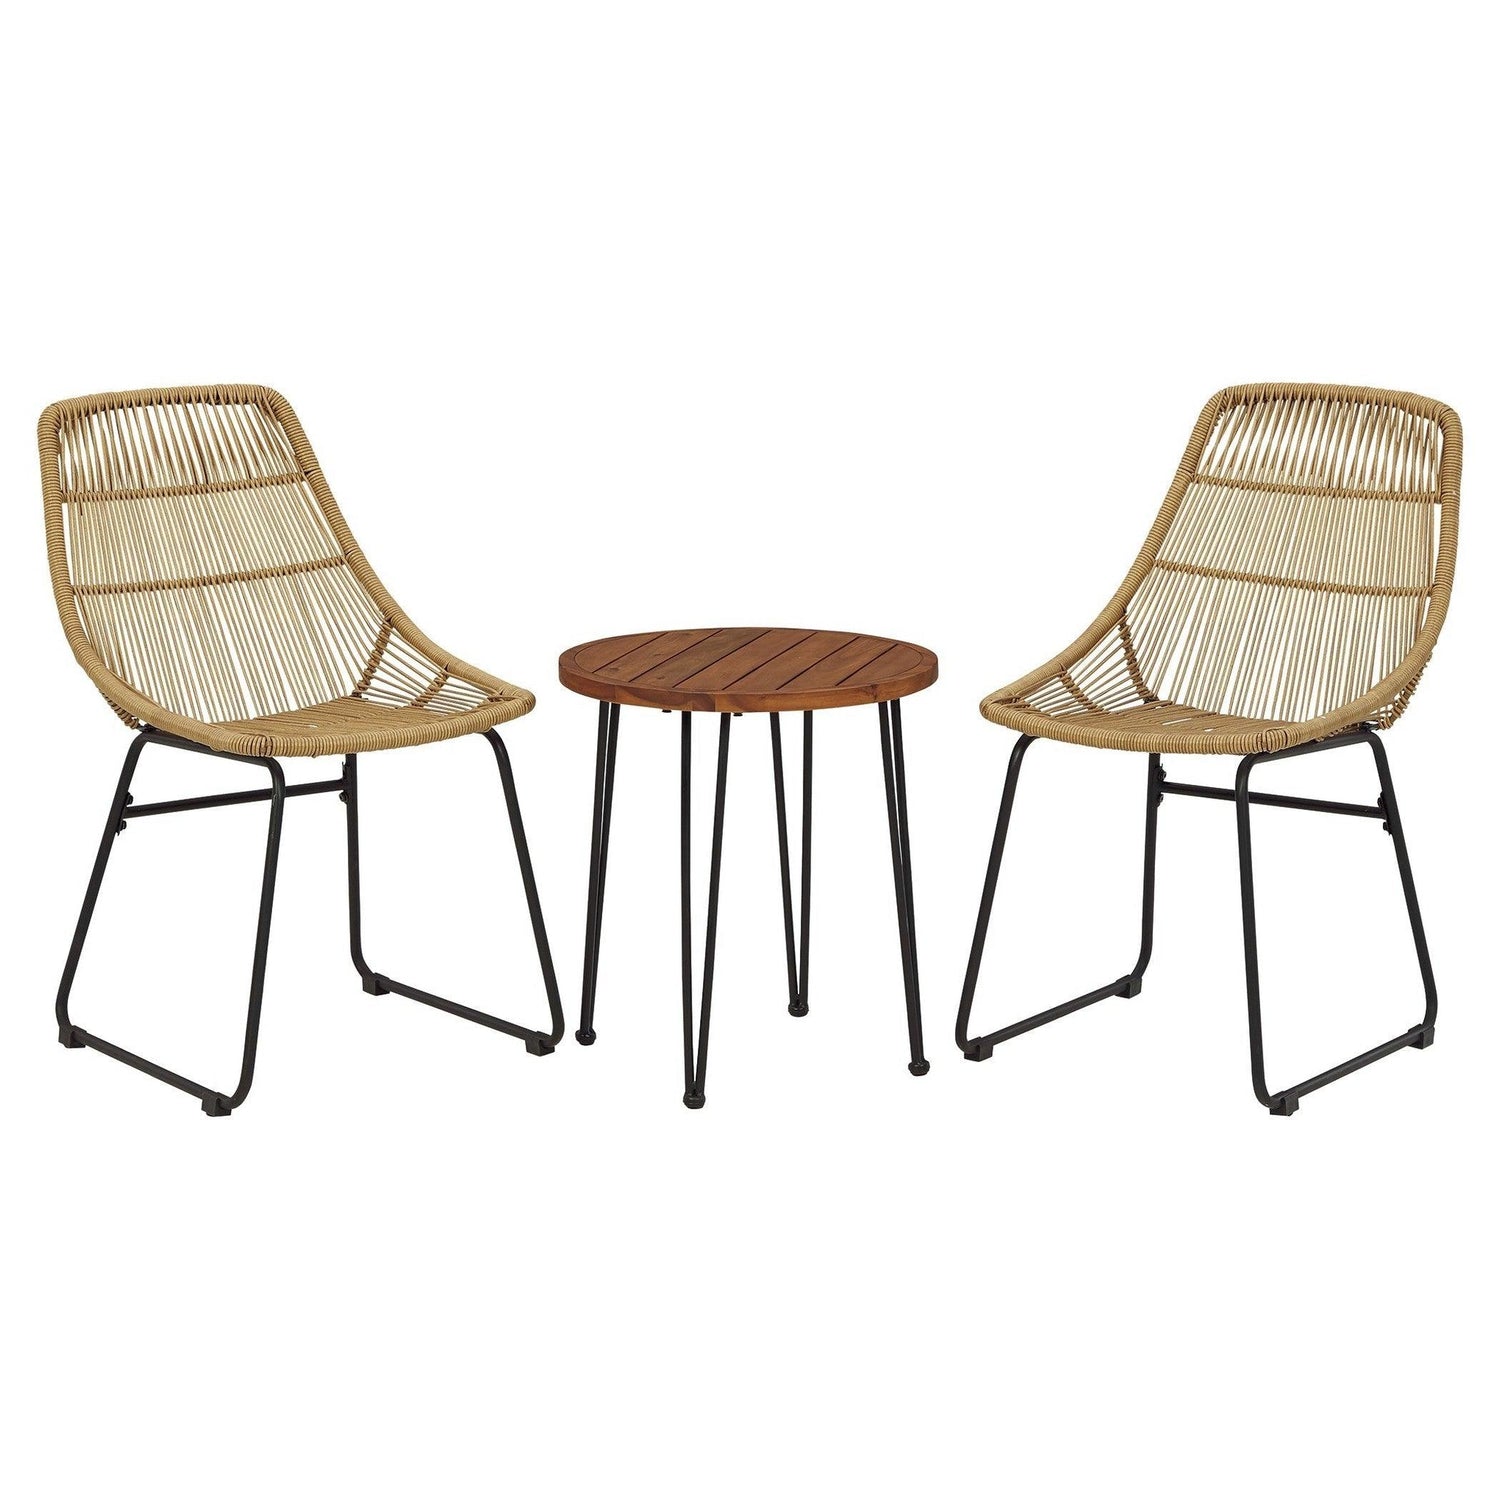 Coral Sand Outdoor Chairs with Table Set (Set of 3) Ash-P306-050